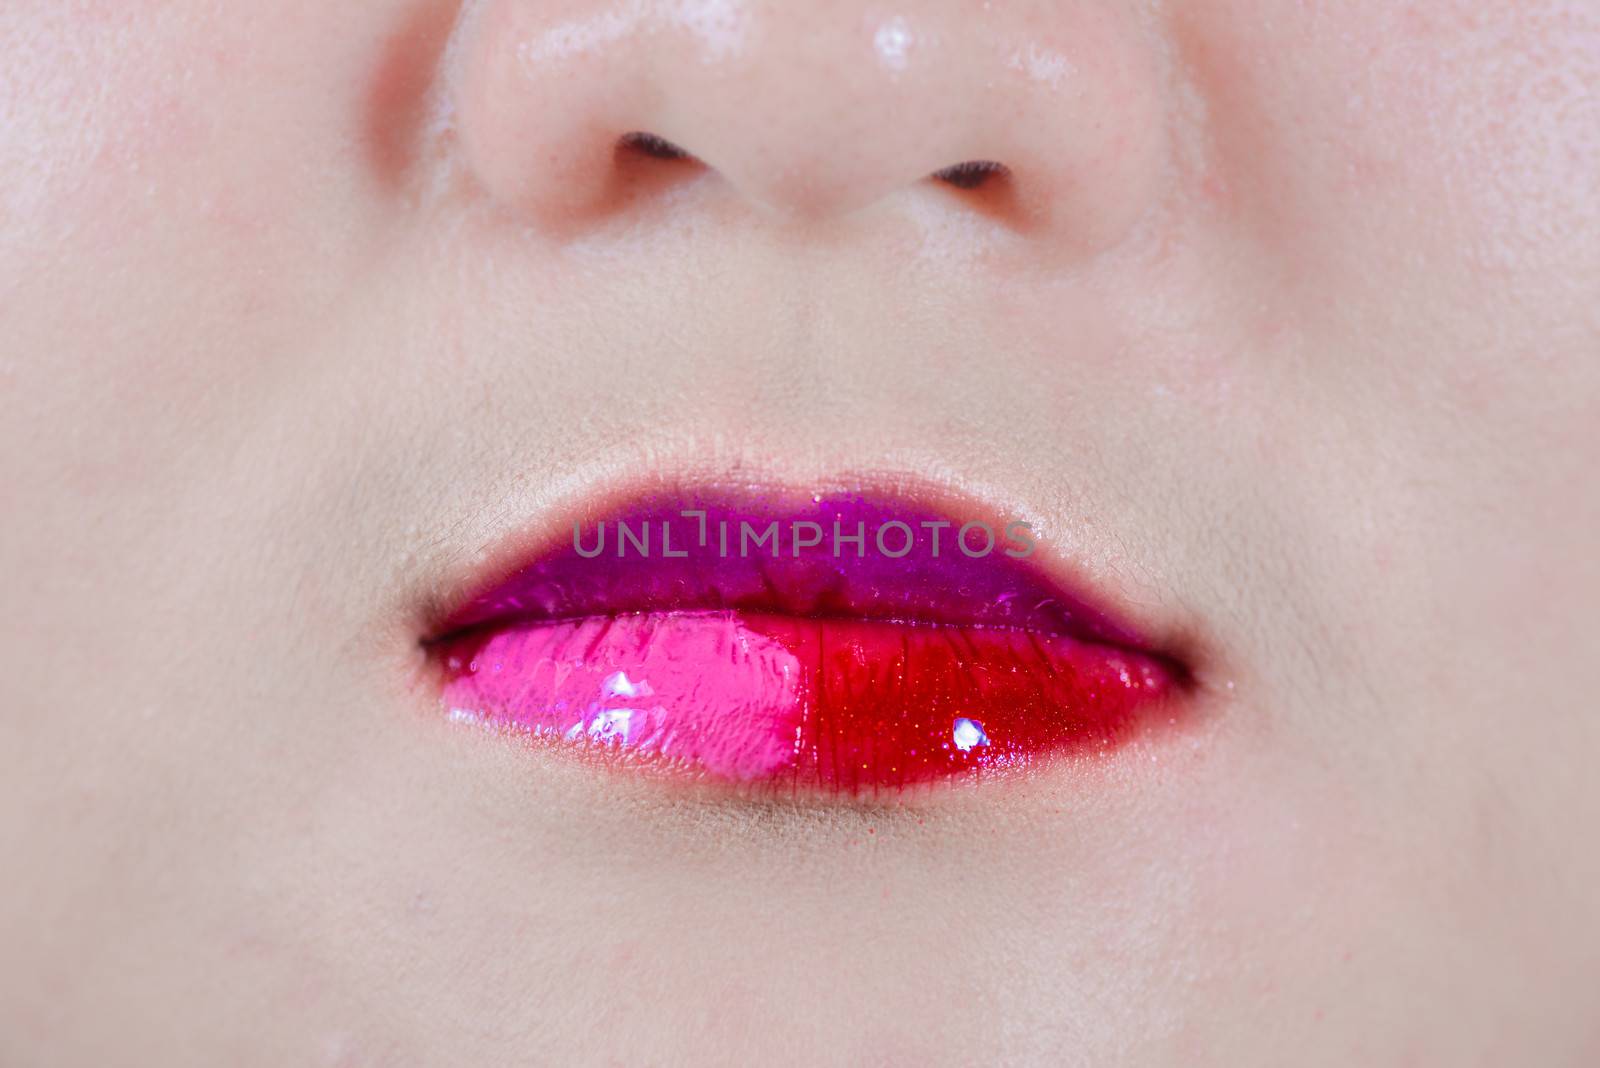 Closeup of woman's lips with makeup with a weird smirk